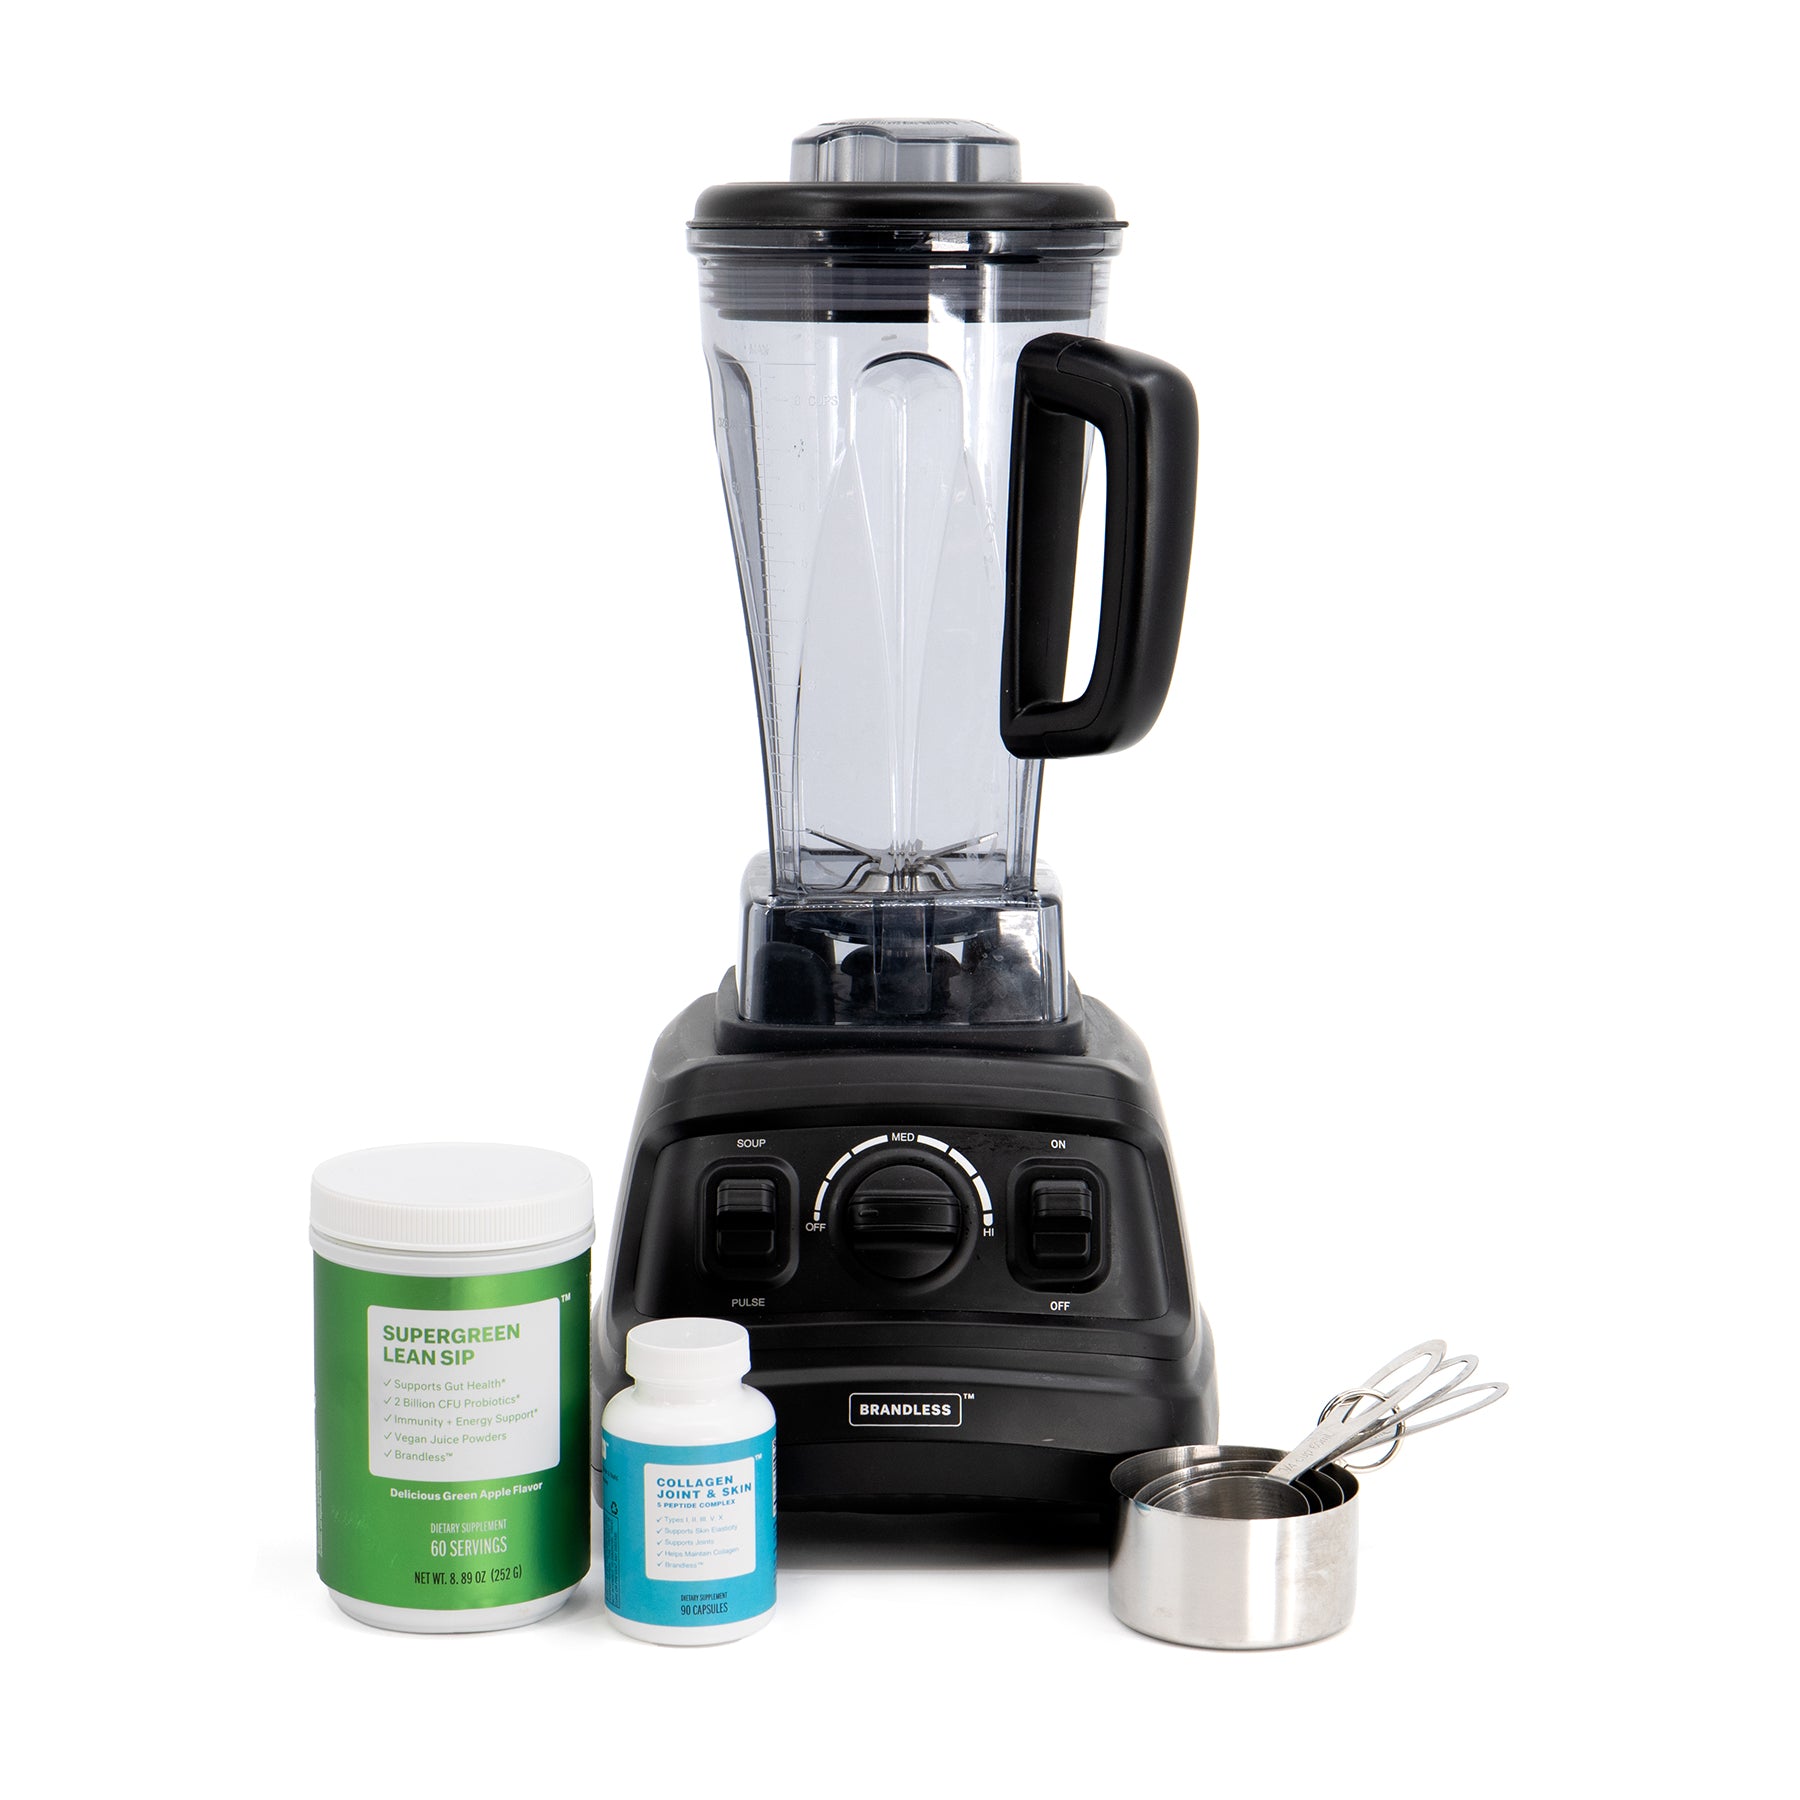 Wellness is Within Your Reach With Pro-Blender - ReadWrite